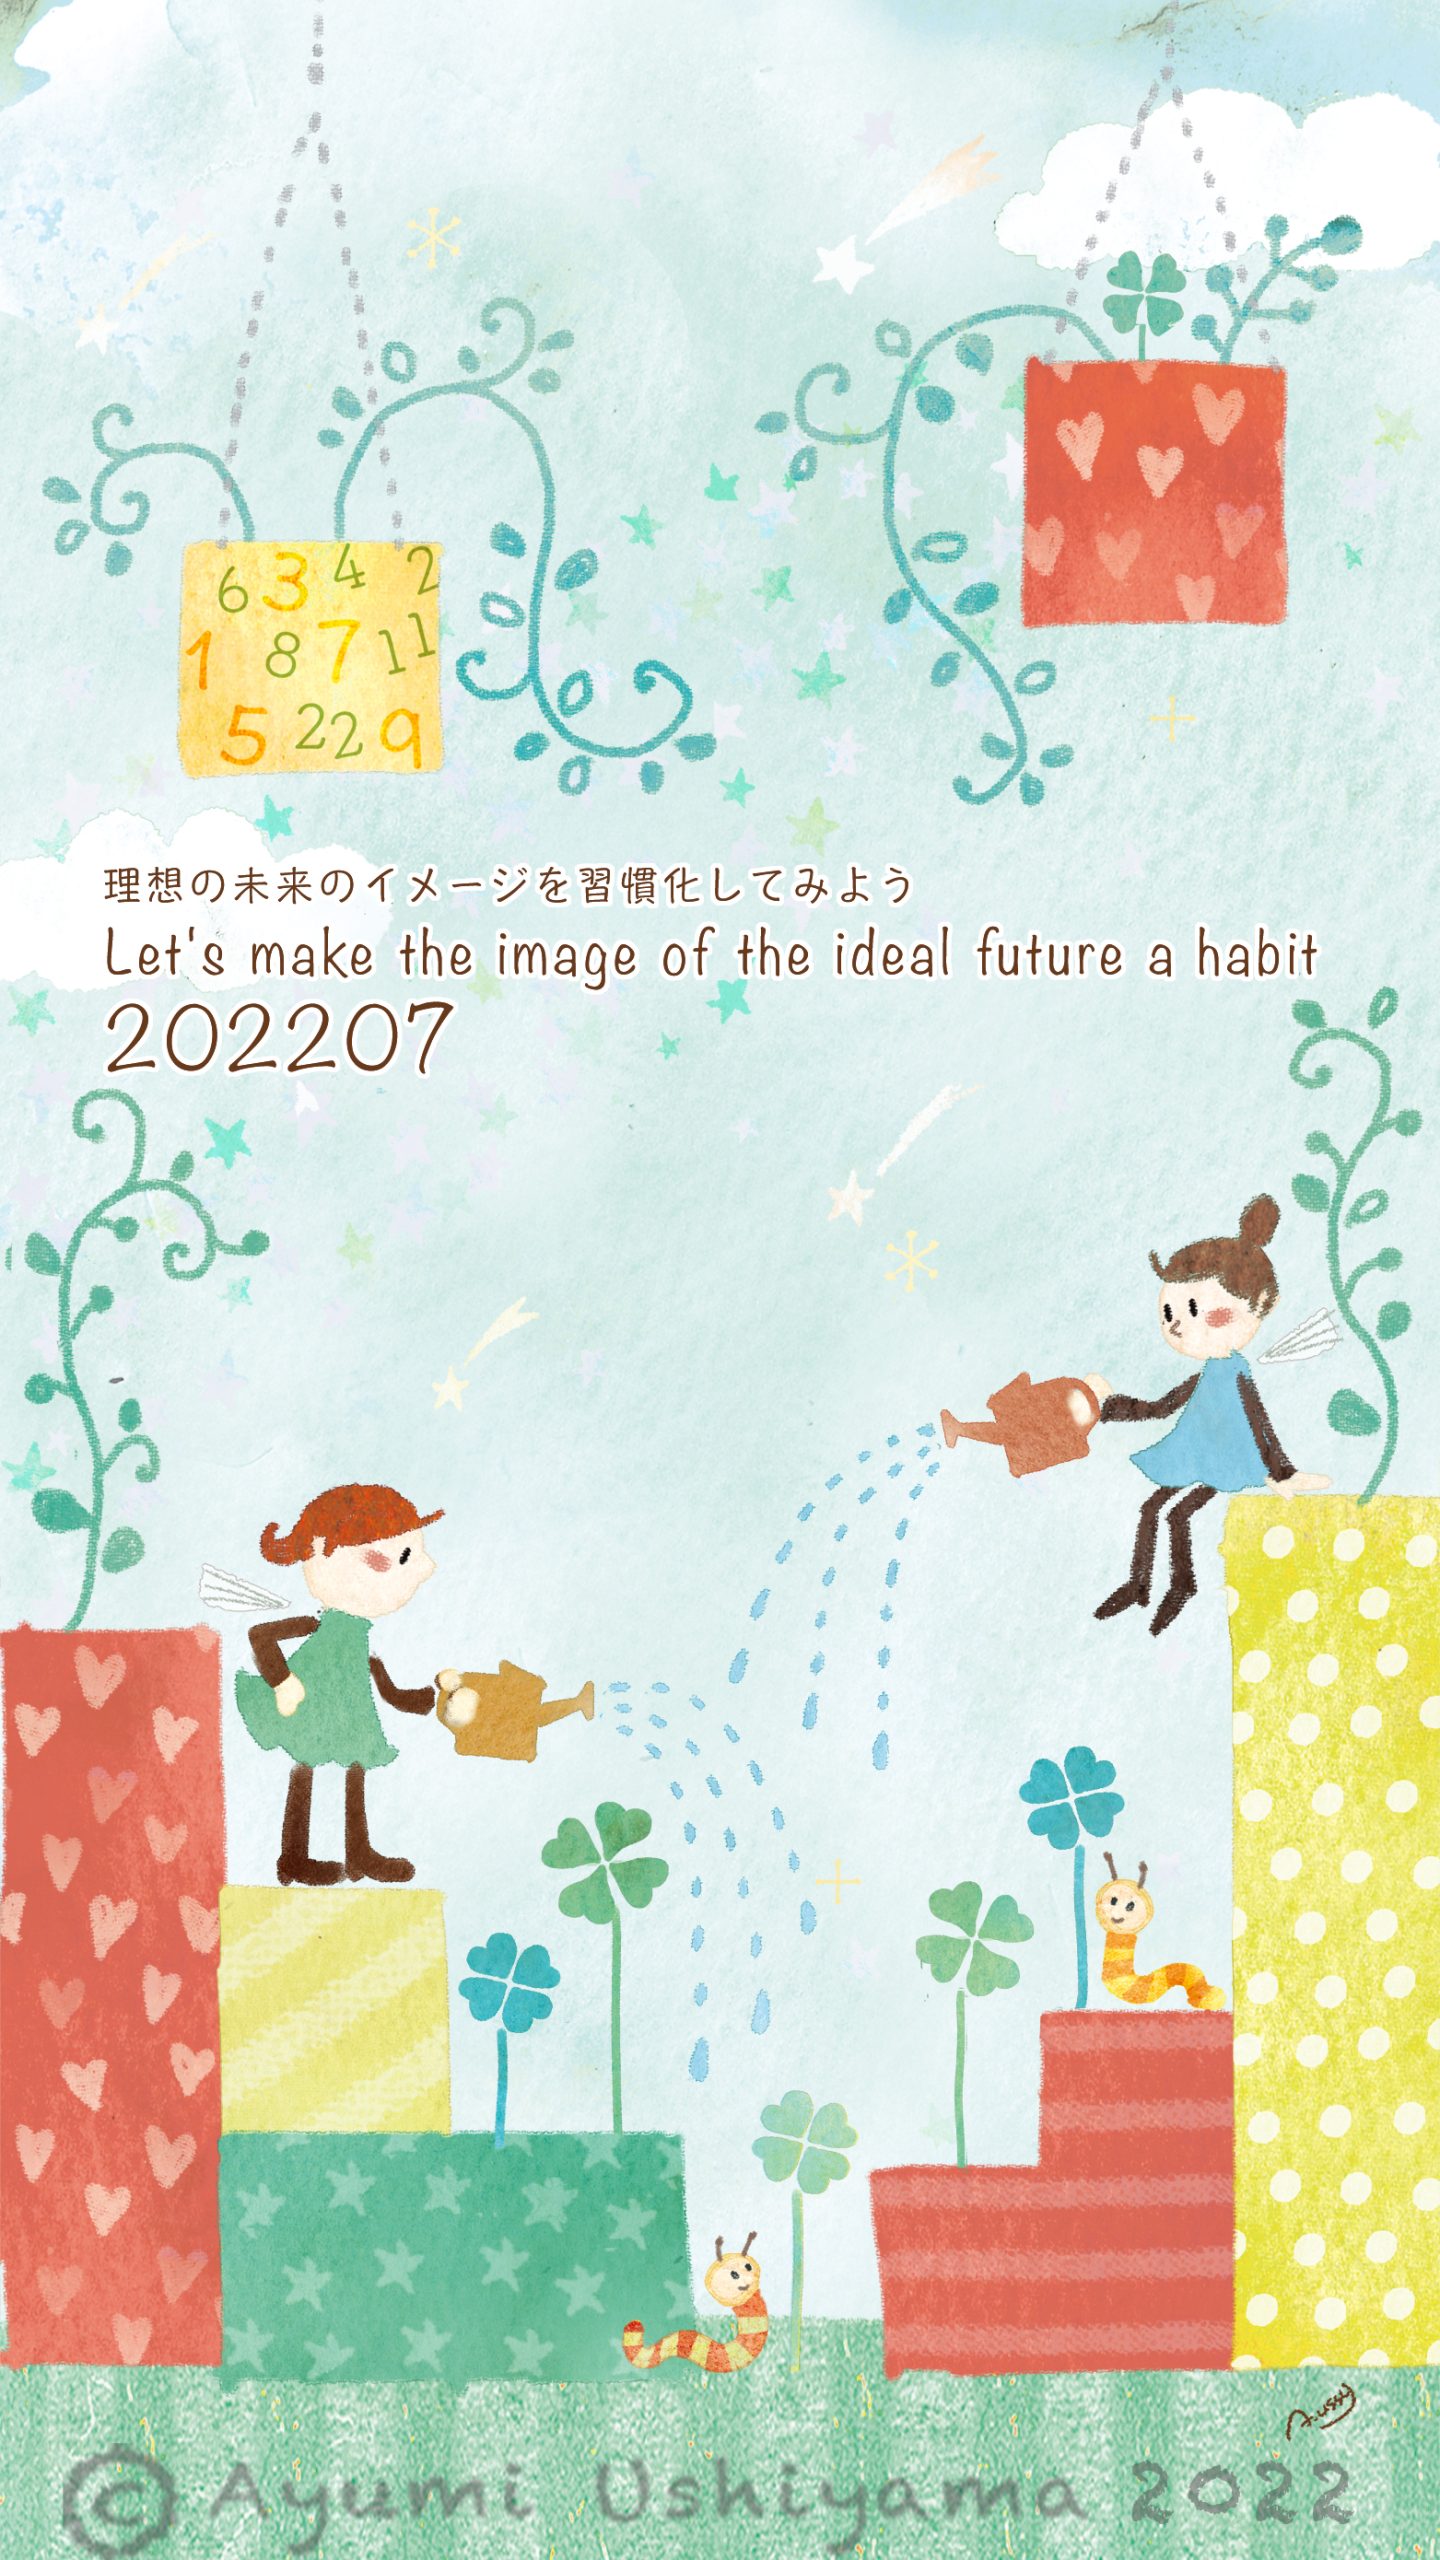 2022.07『Let’s make the image of the ideal future a habit』